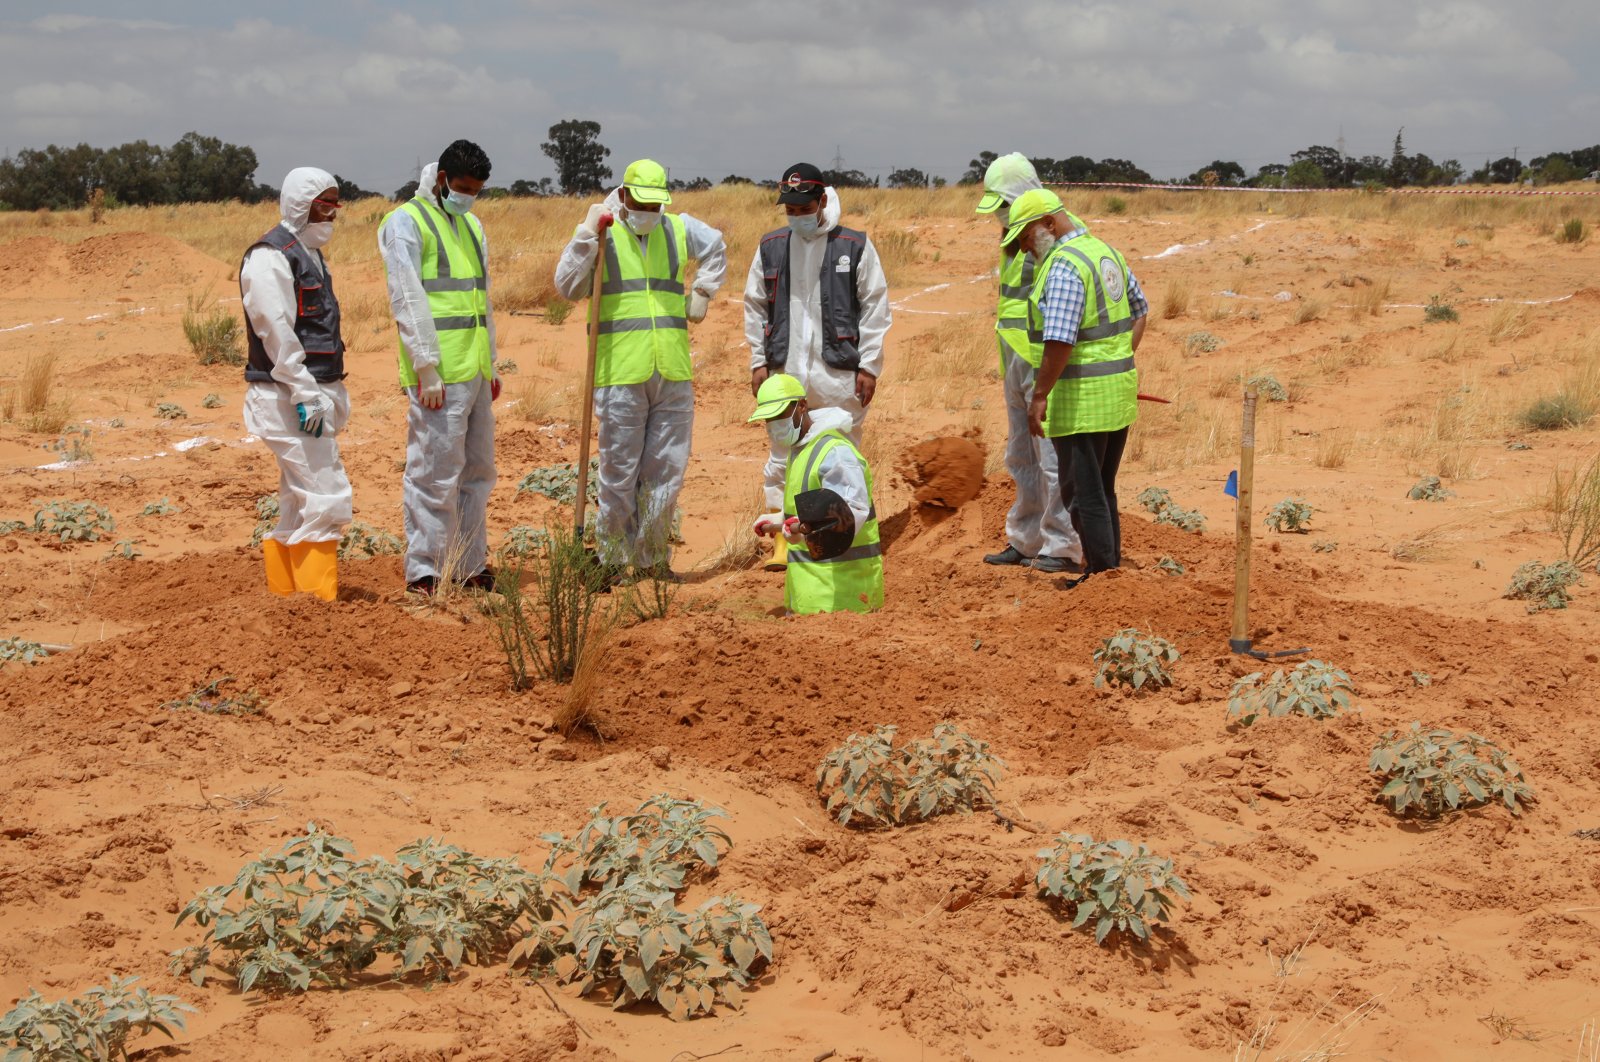 Members of the Government of National Accord's (GNA) missing persons bureau search for human remains in mass graves discovered in areas liberated from Khalifa Haftar's forces, in Tarhuna city, Libya, June 23, 2020. (Reuters Photo)